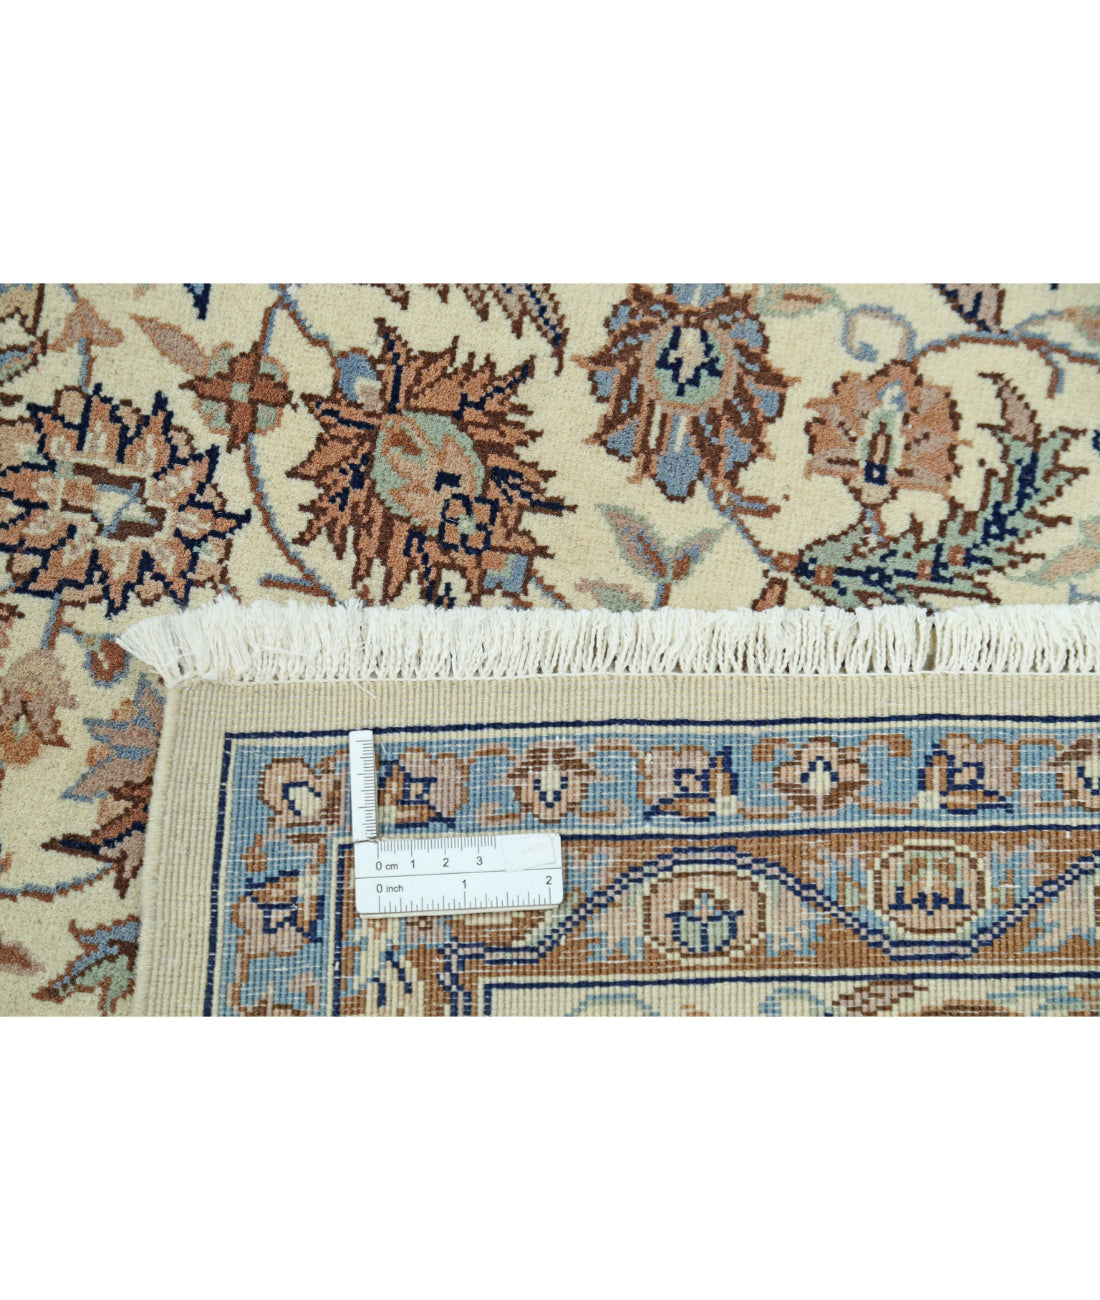 Hand Knotted Heritage Fine Persian Style Wool Rug - 5'11'' x 9'0'' 5'11'' x 9'0'' (178 X 270) / Ivory / Ivory